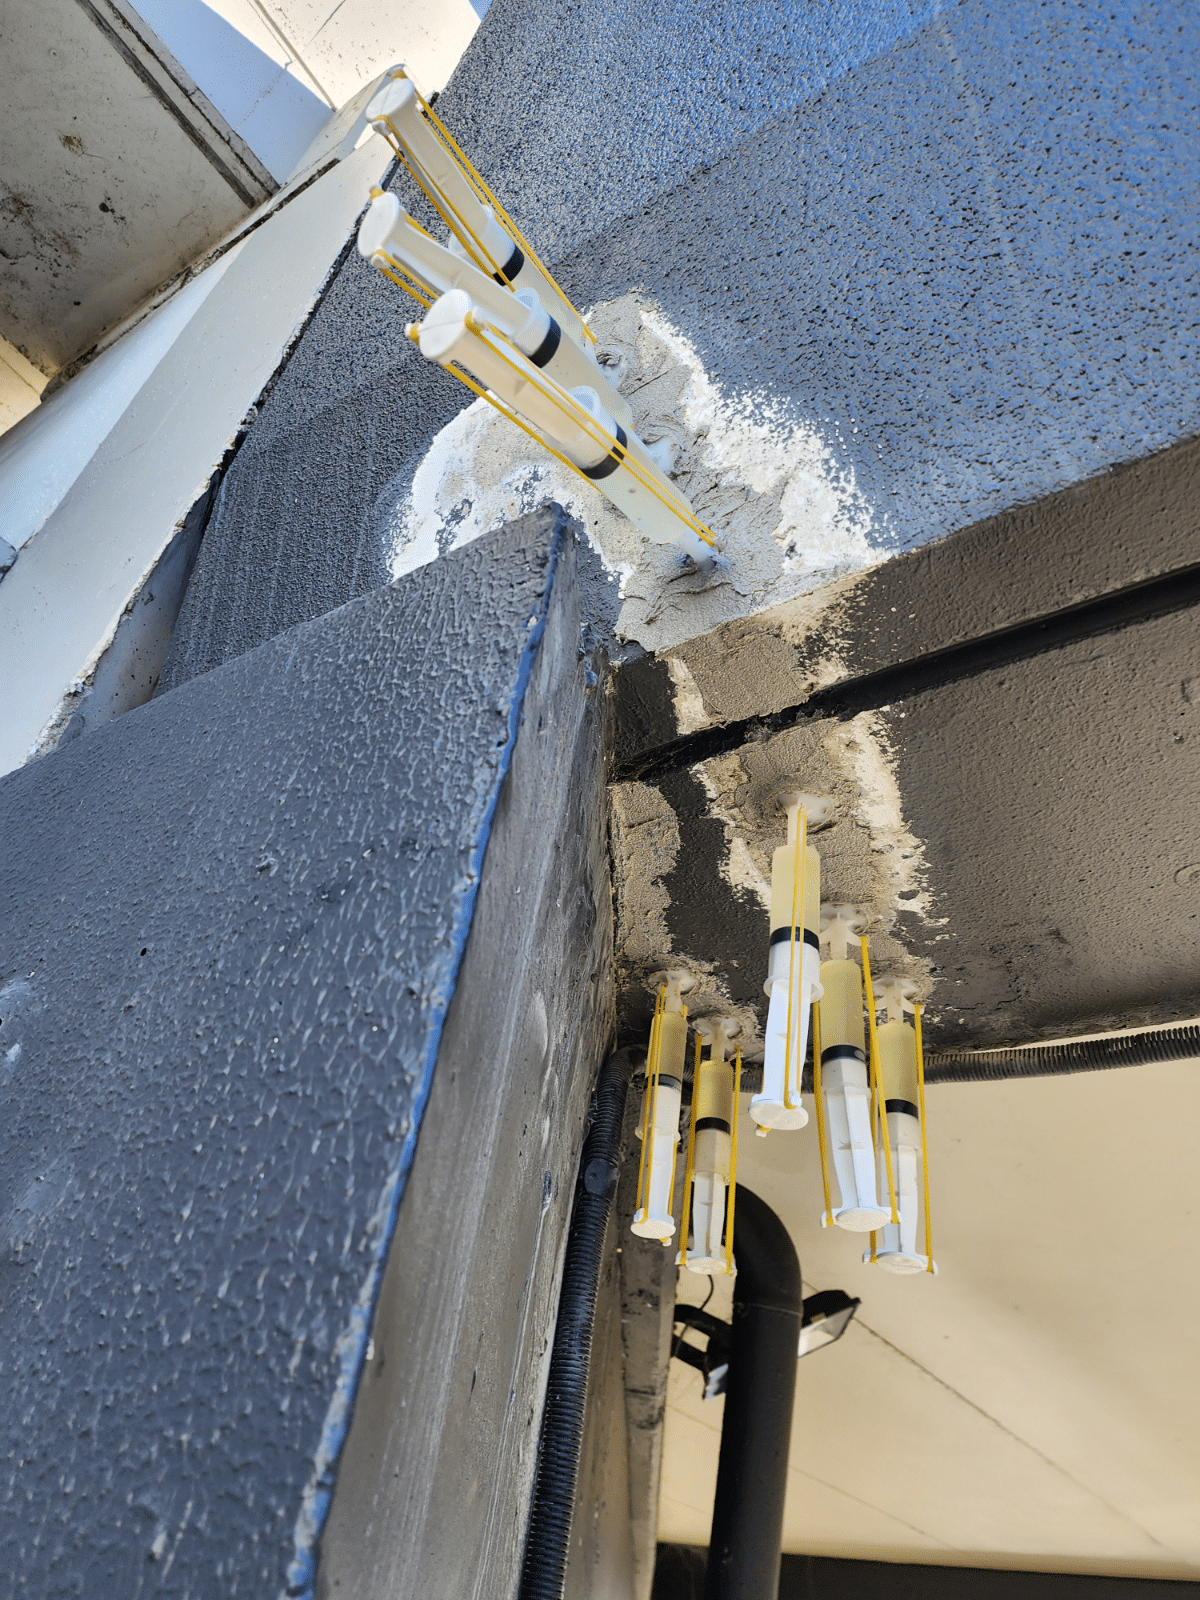 structural crack repair with epoxy injections by Waterstop Solutions Sydney NSW